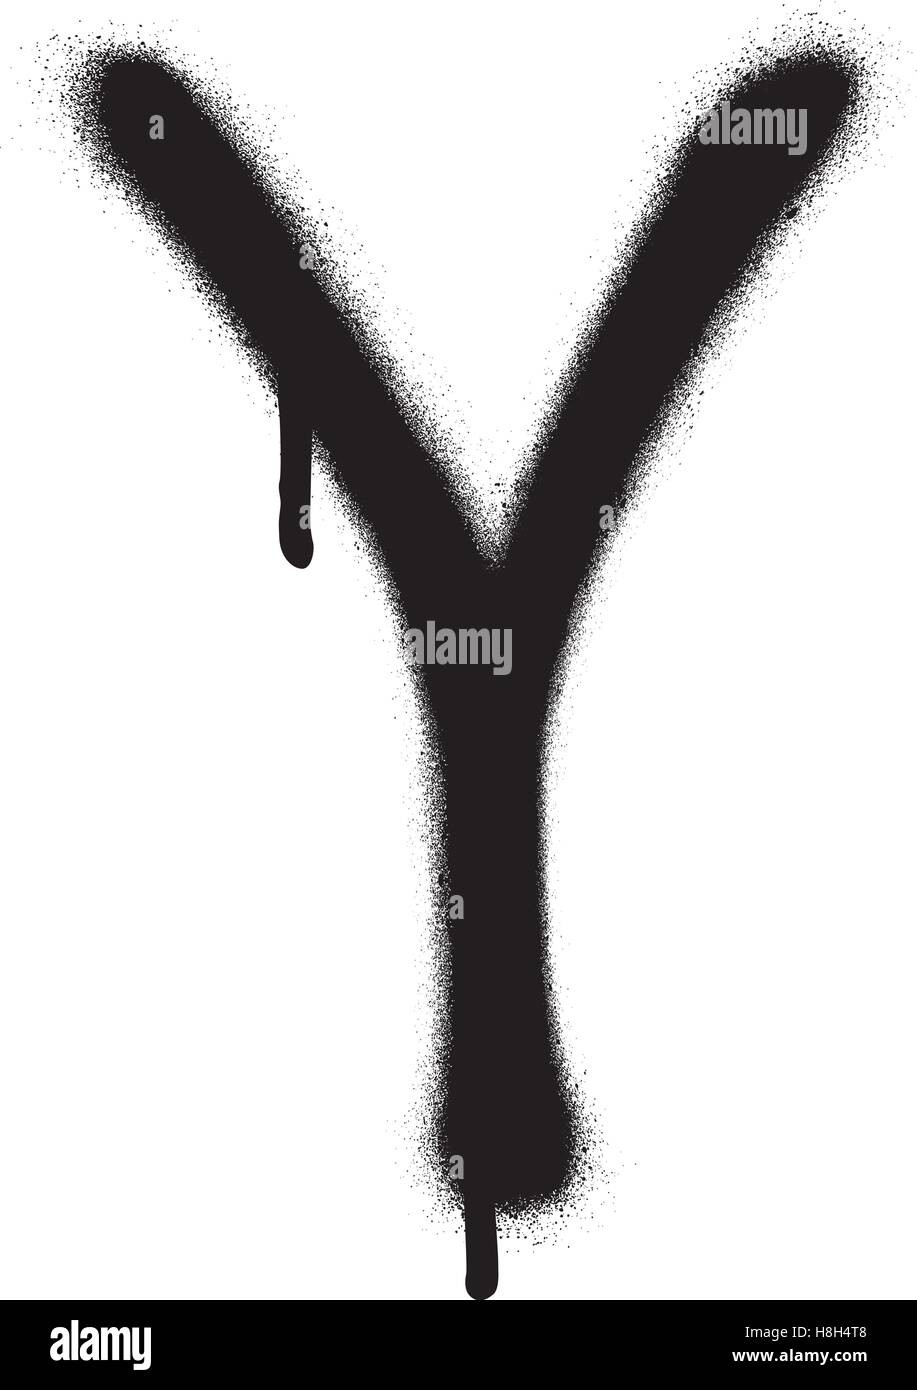 sprayed Y font graffiti with leak in black over white Stock Vector